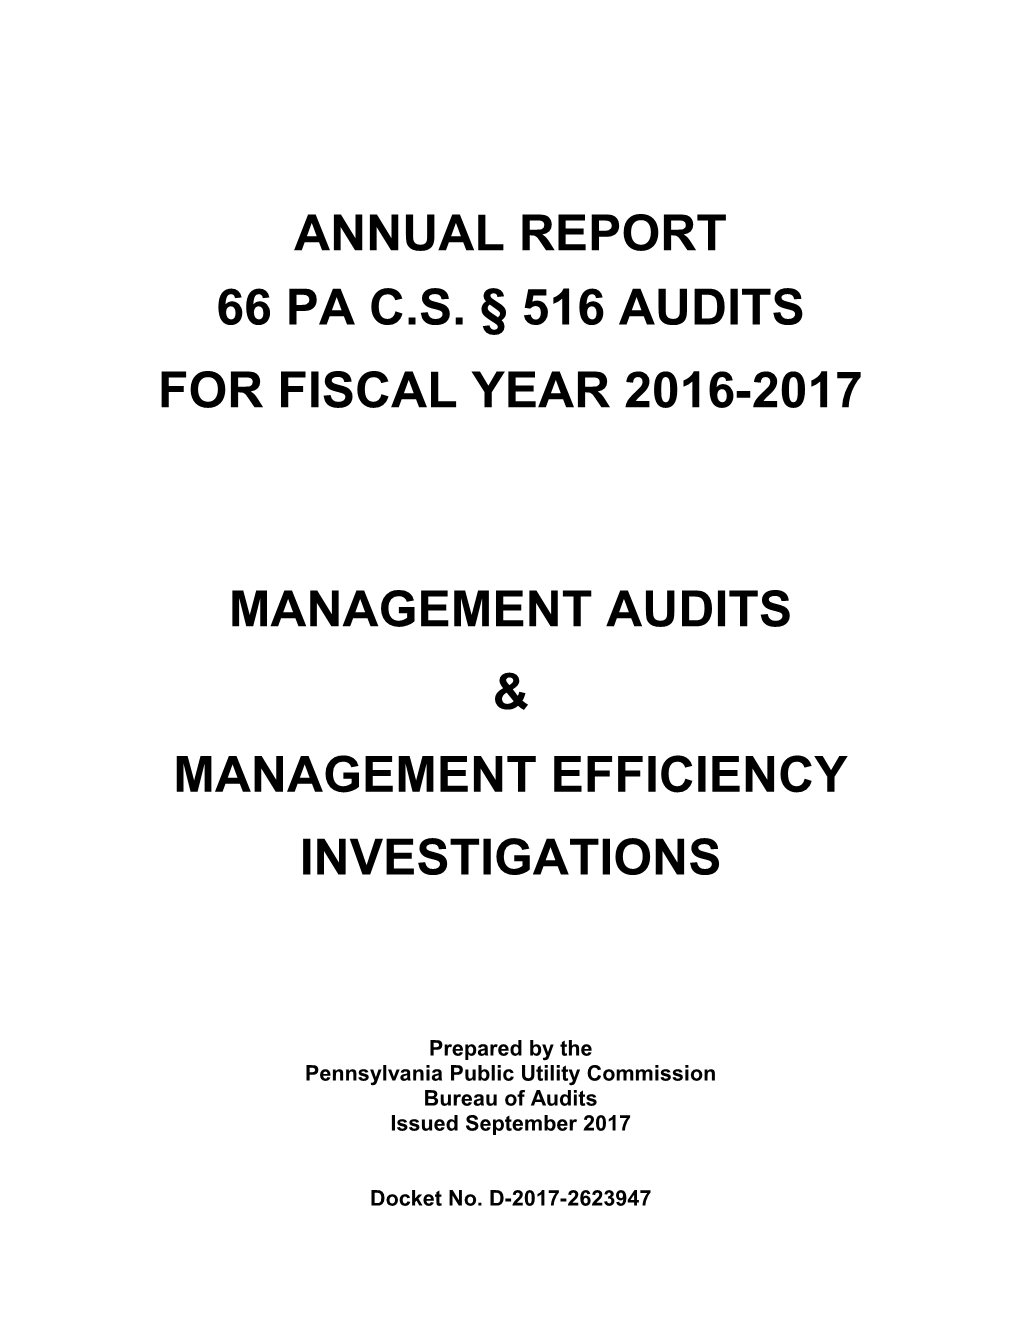 For Fiscal Year 2016-2017